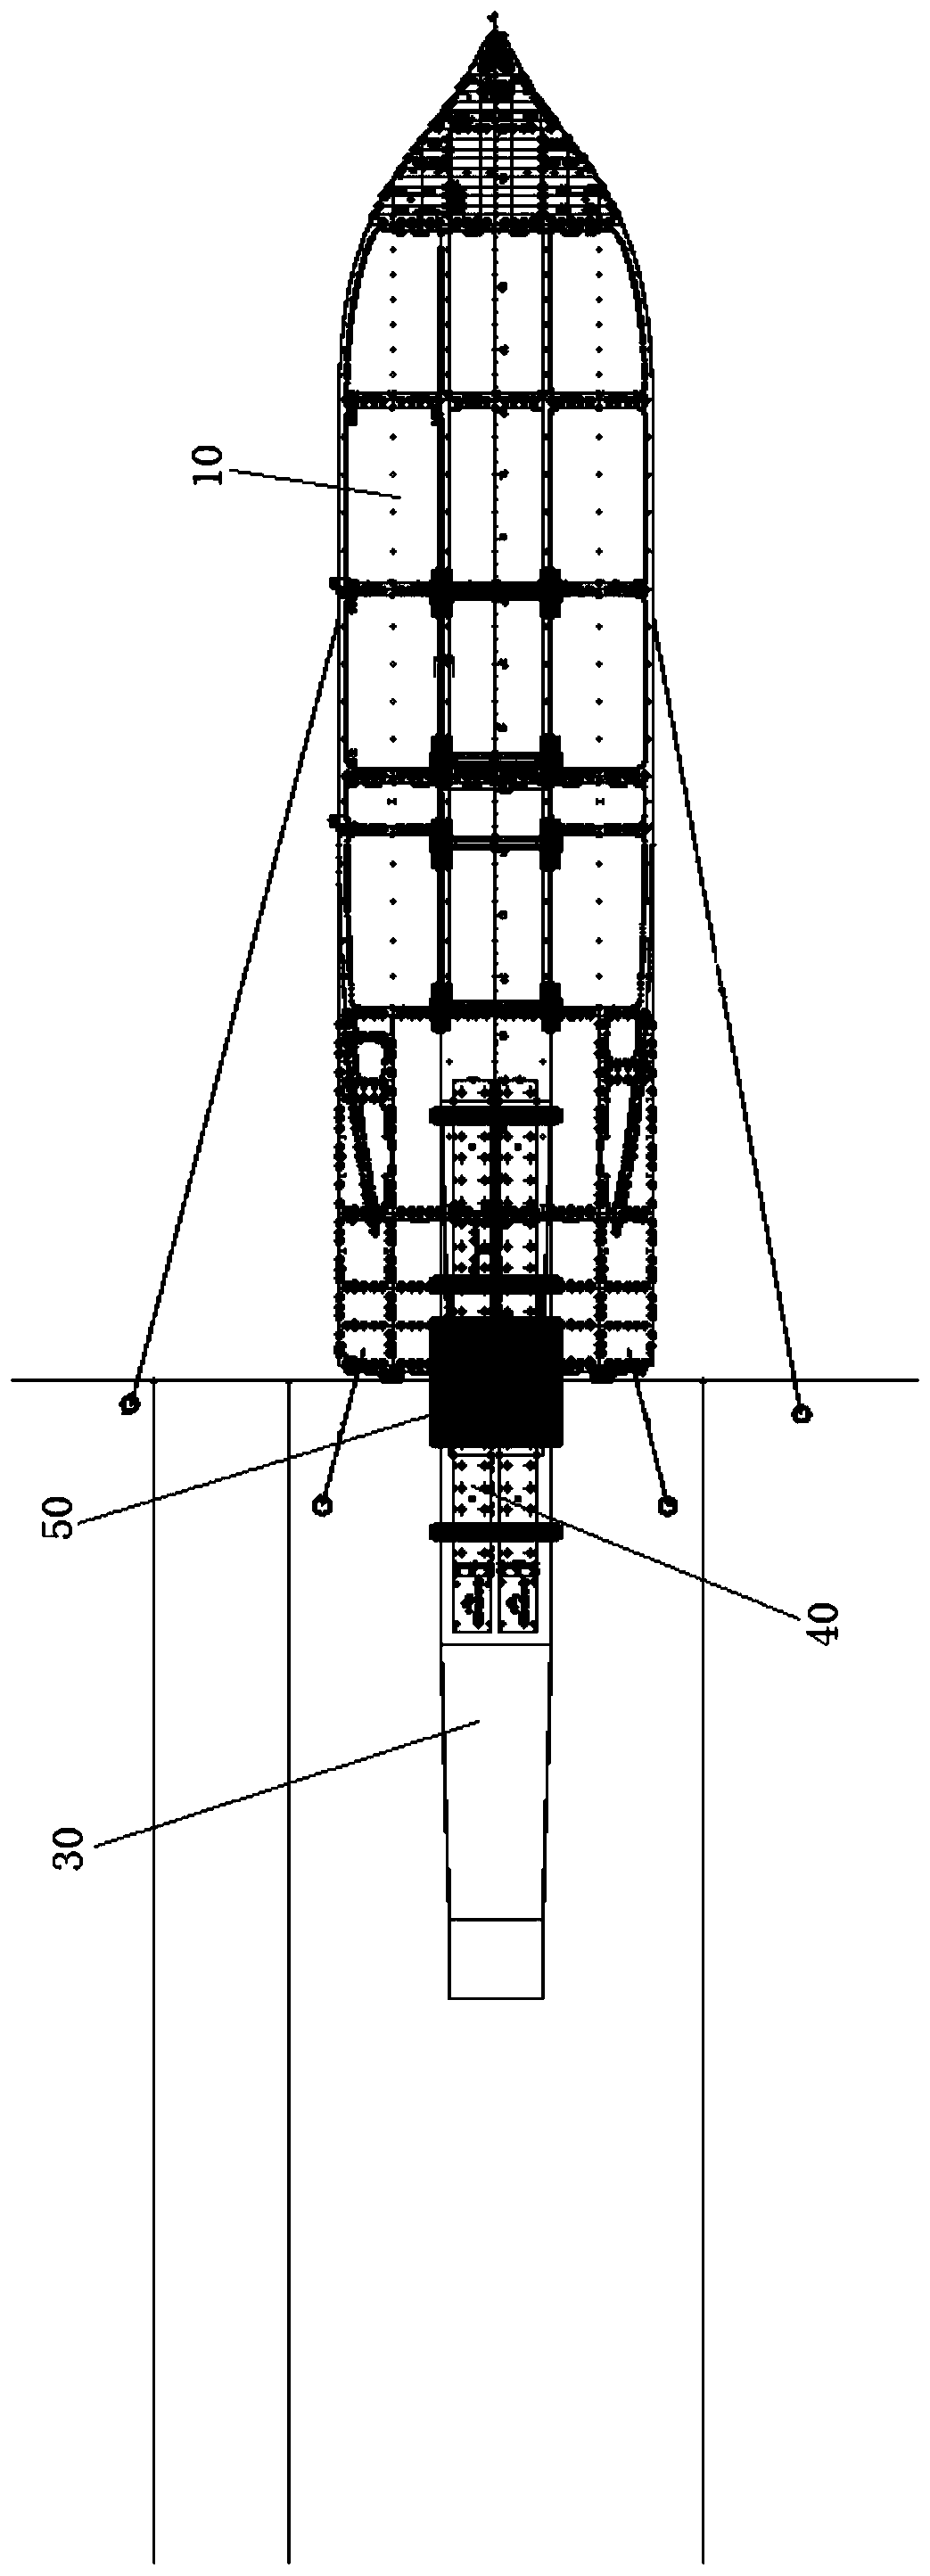 Roll-on and roll-off boarding method for offshore wind power foundation steel pipe pile